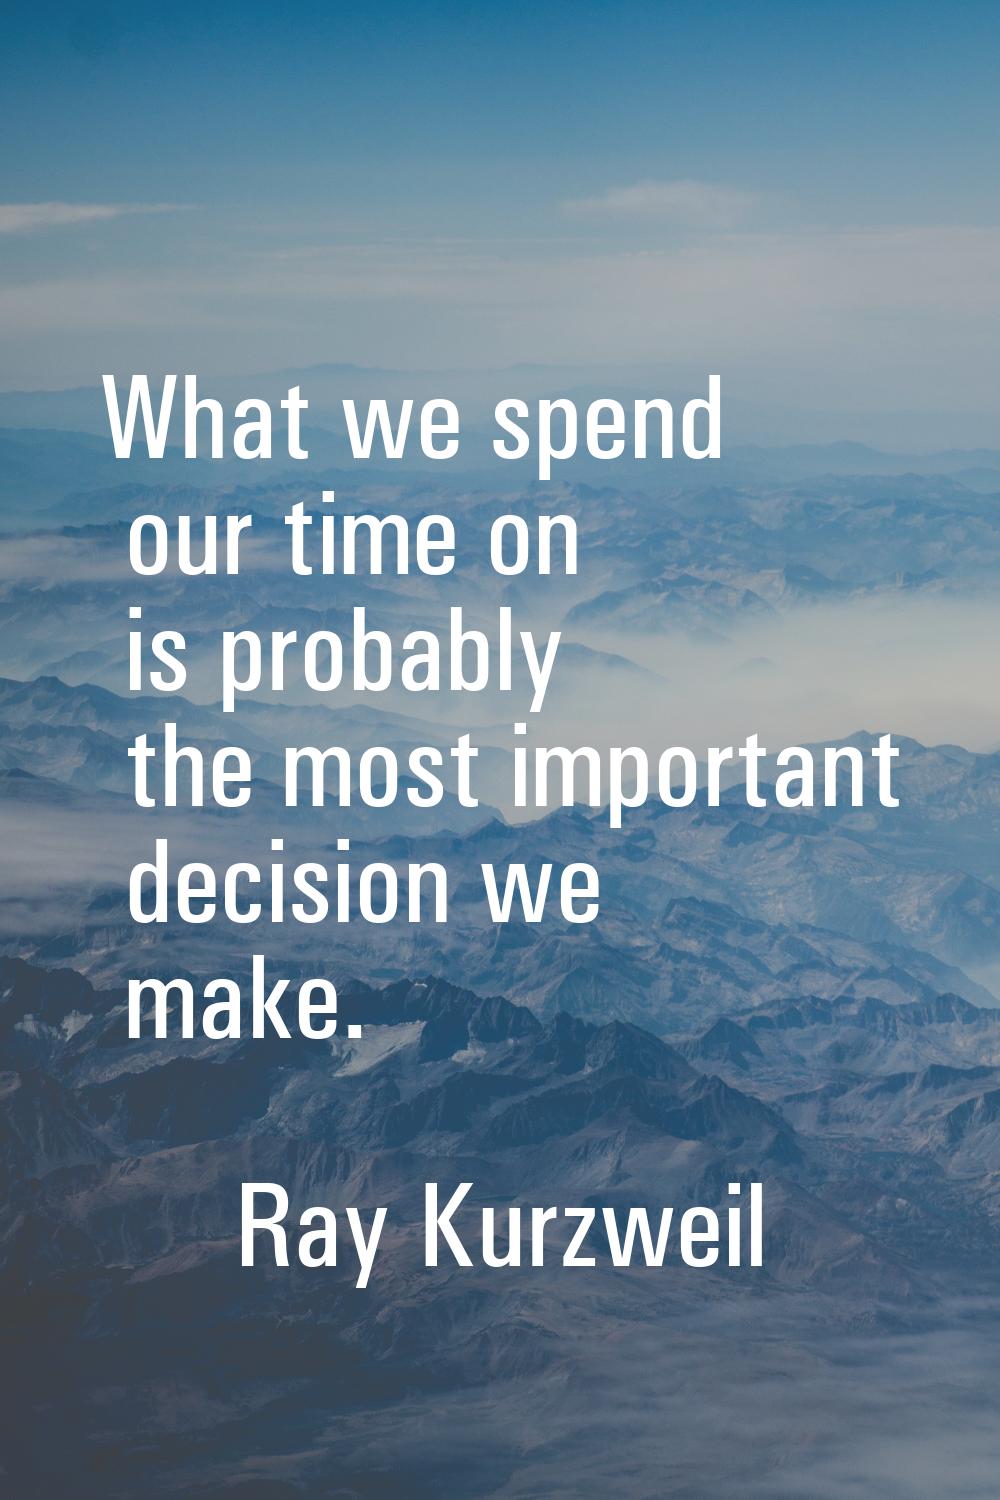 What we spend our time on is probably the most important decision we make.